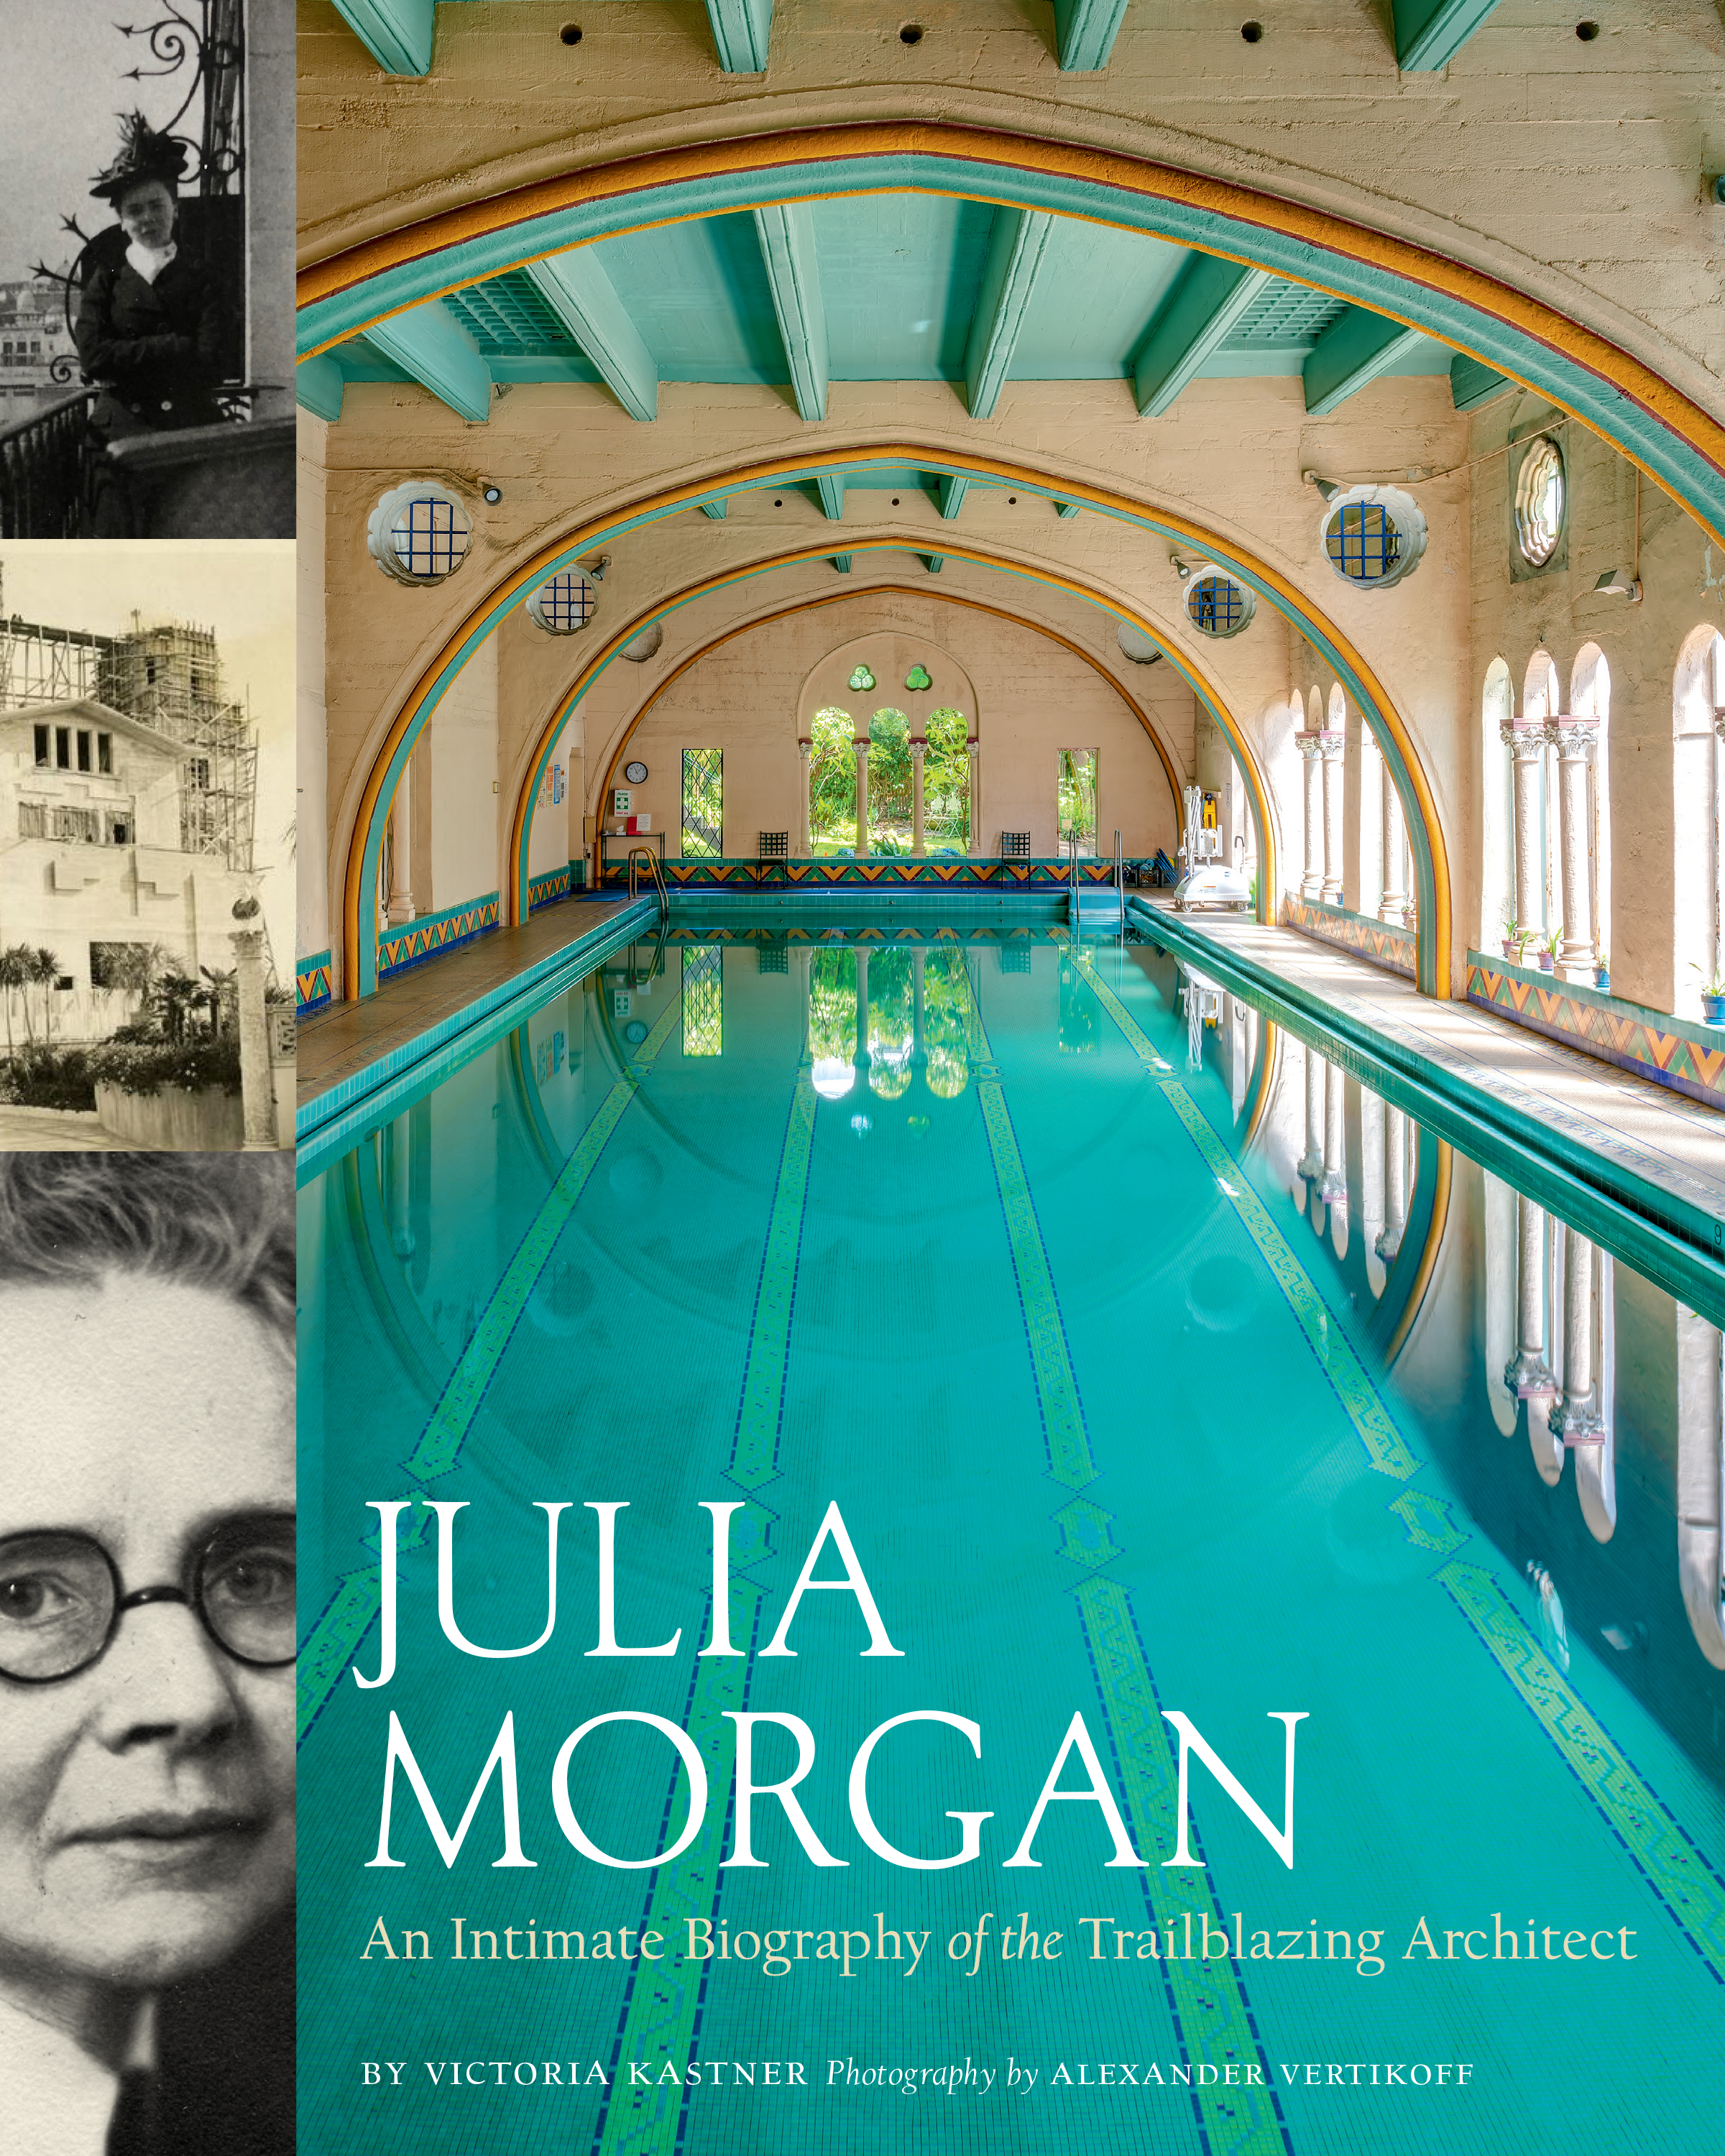 Cover of the book "Julia Morgan: An Intimate Biography of the Trailblazing Architect"